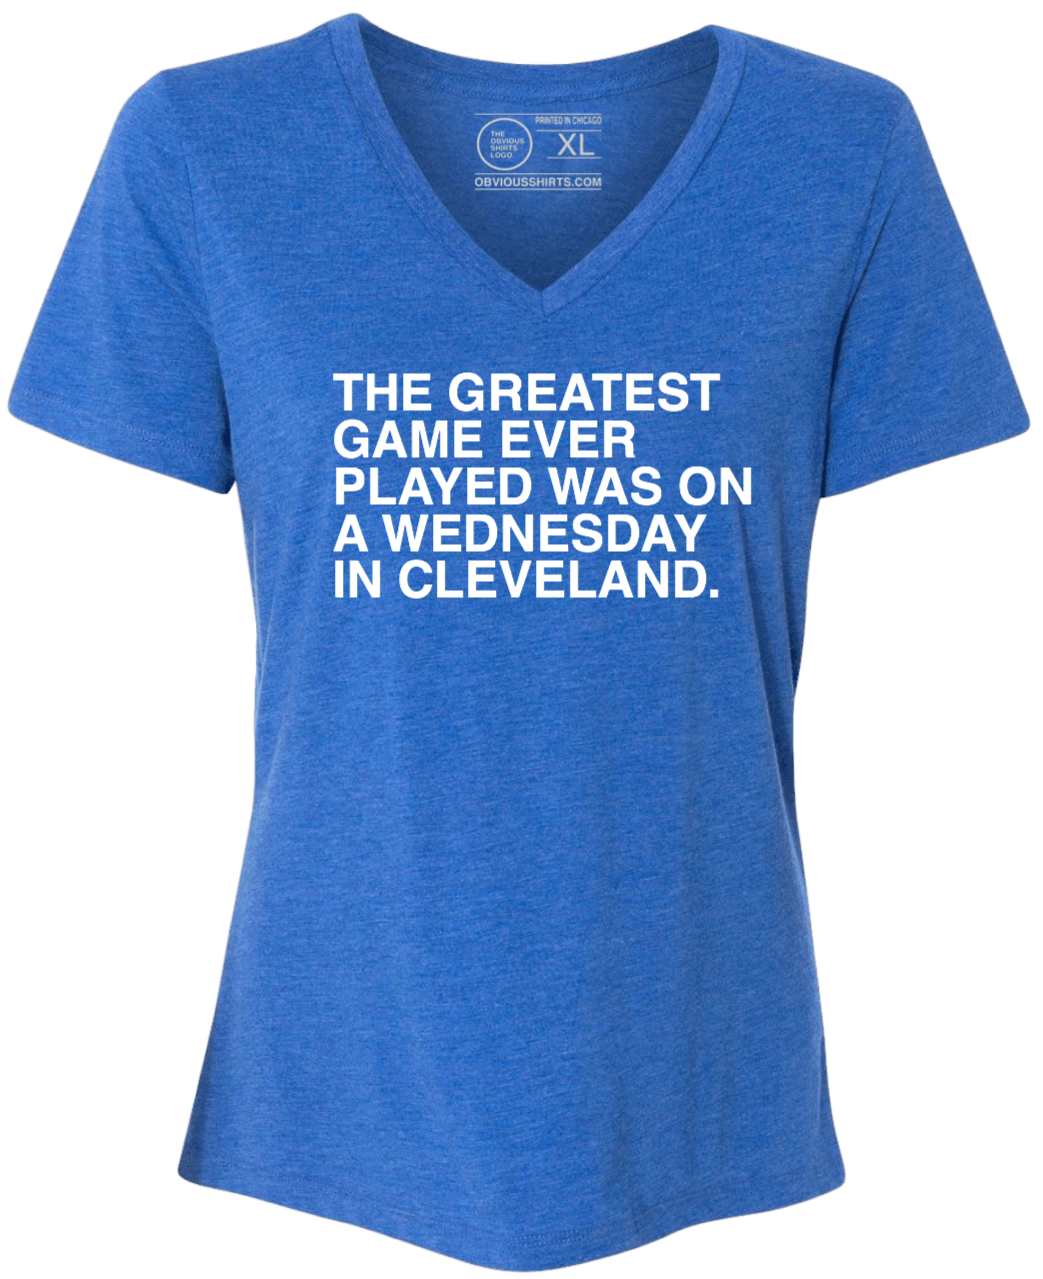 THE GREATEST GAME EVER PLAYED. (WOMEN'S V-NECK) - OBVIOUS SHIRTS.